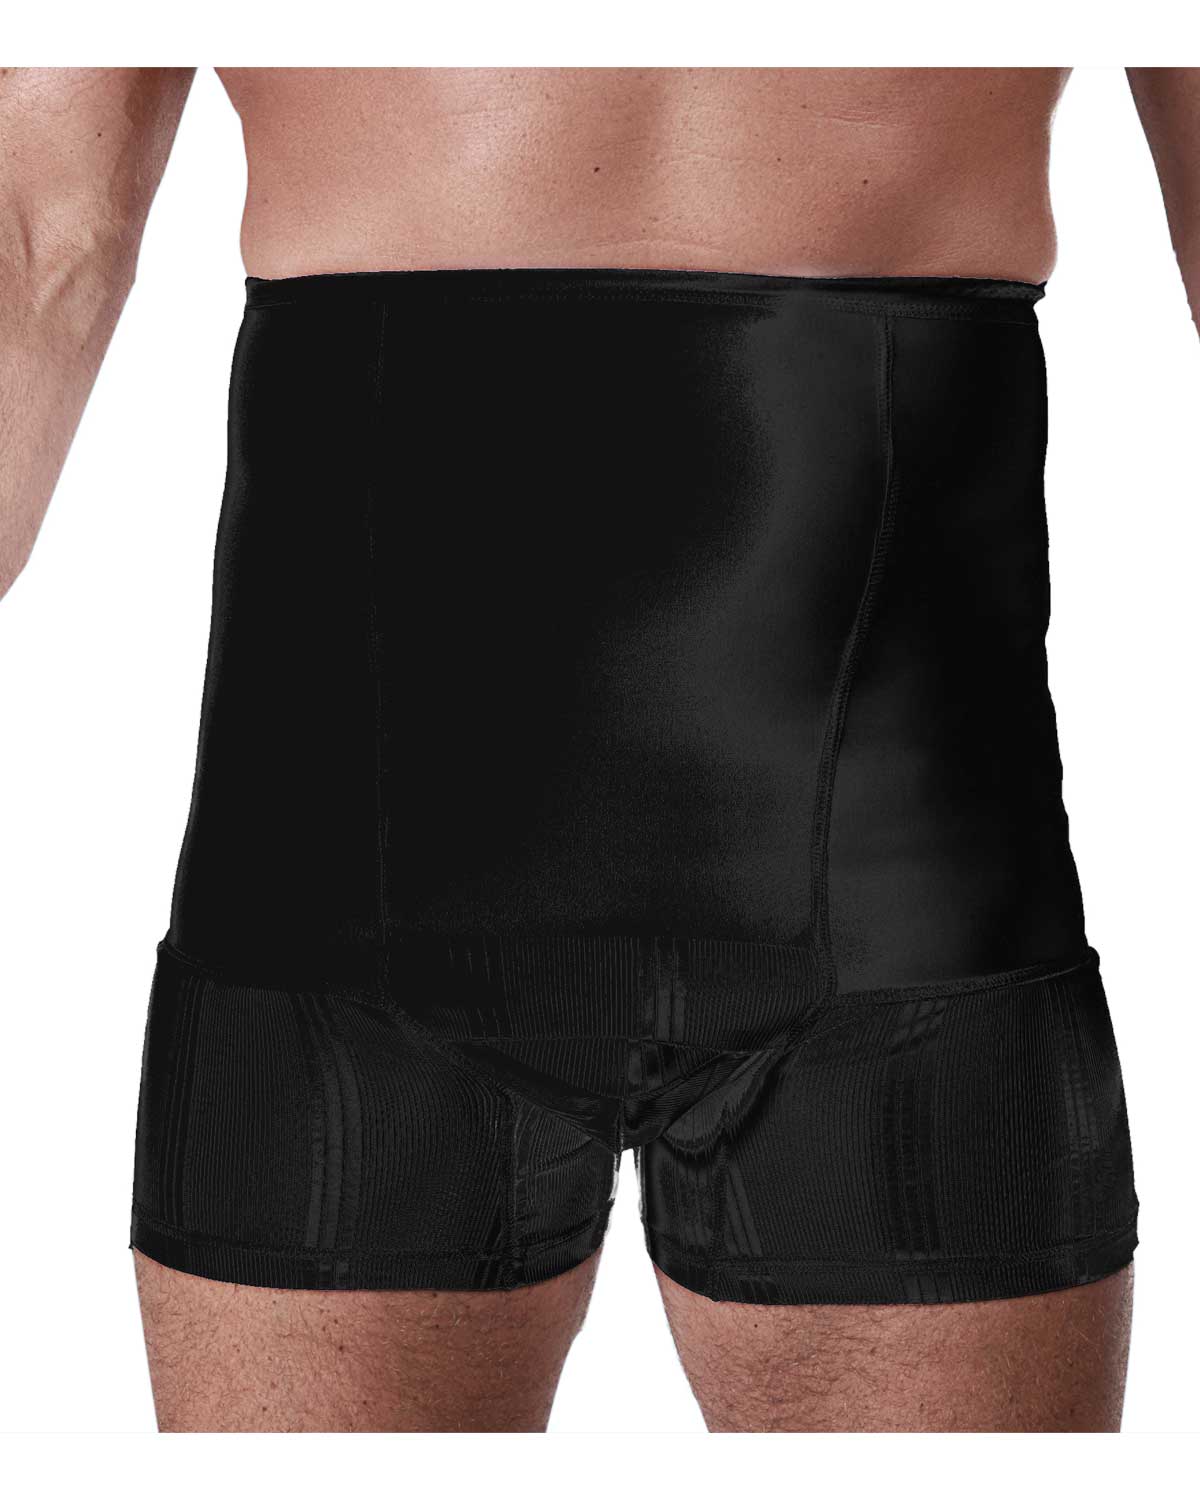 CUI Mens Hernia Low Waist Support Girdle With Legs - 1 each, XSMALL, BLACK